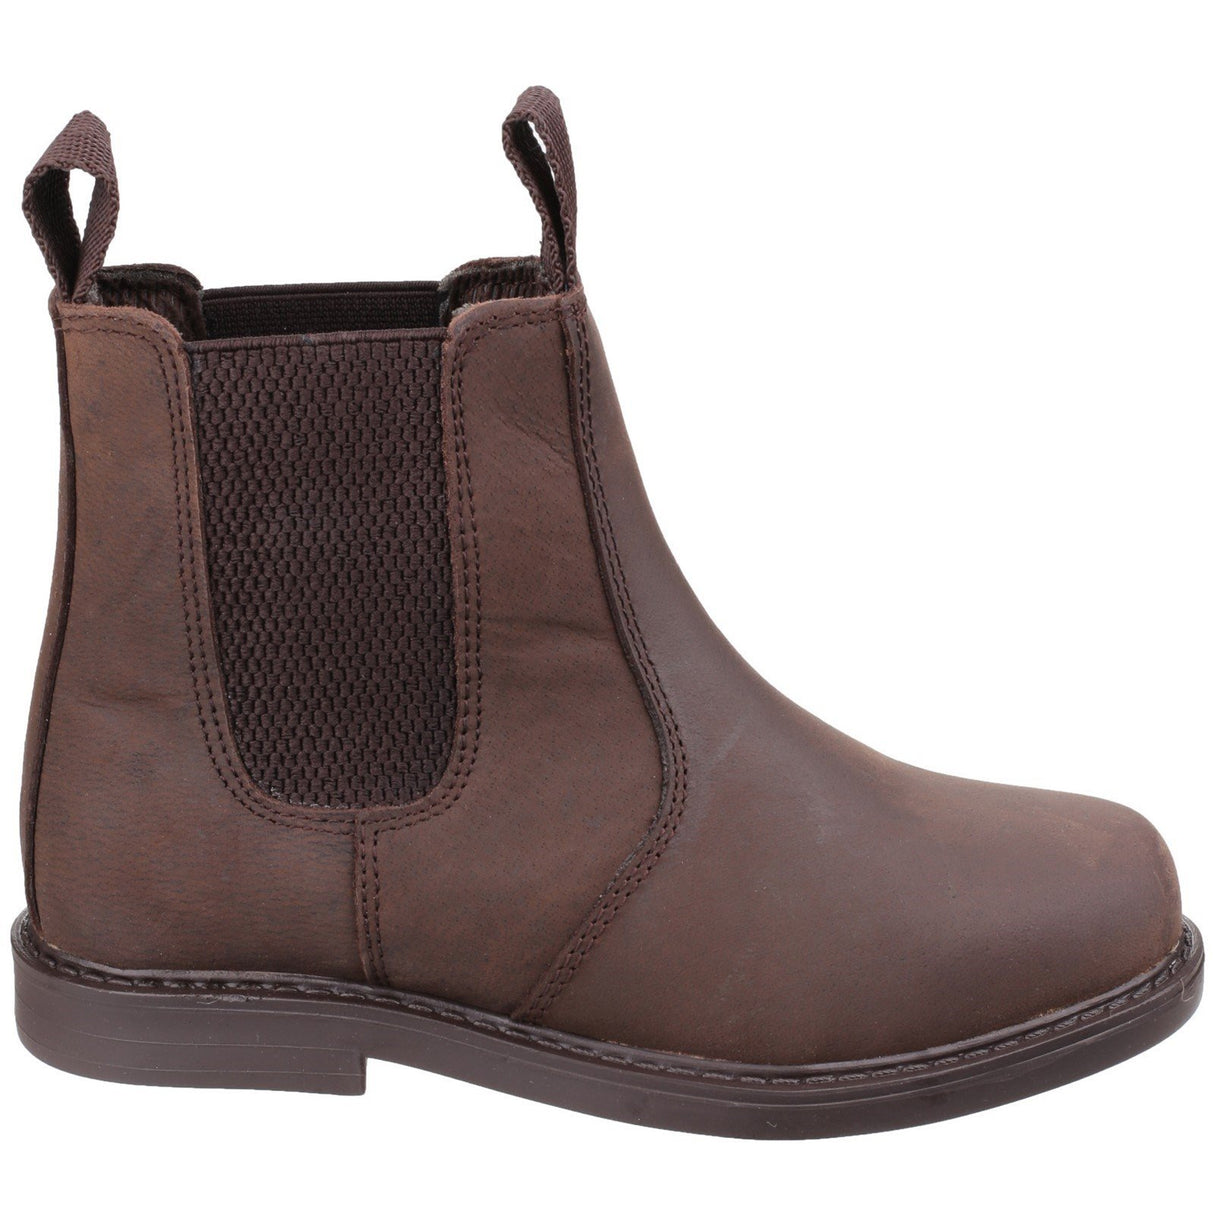 Cotswolds Camberwell Junior Dealer Boots